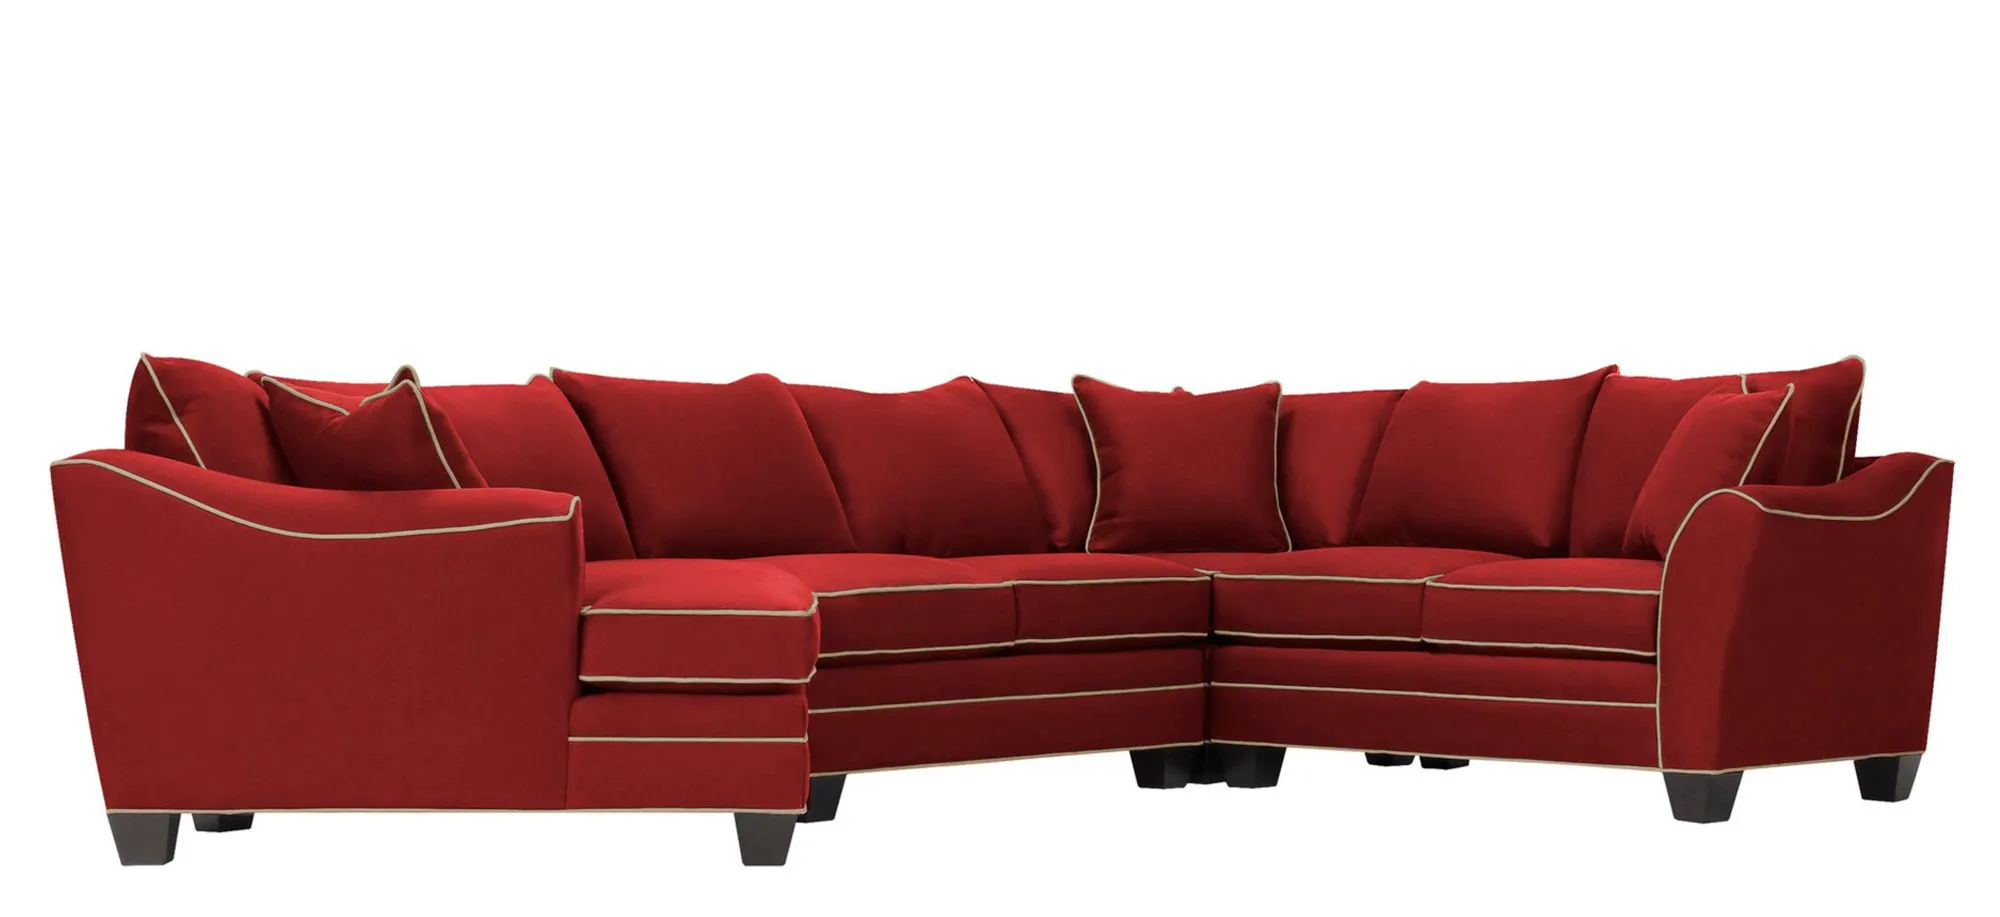 Foresthill 4-pc. Left Hand Cuddler with Loveseat Sectional Sofa in Suede So Soft Cardinal/Mineral by H.M. Richards